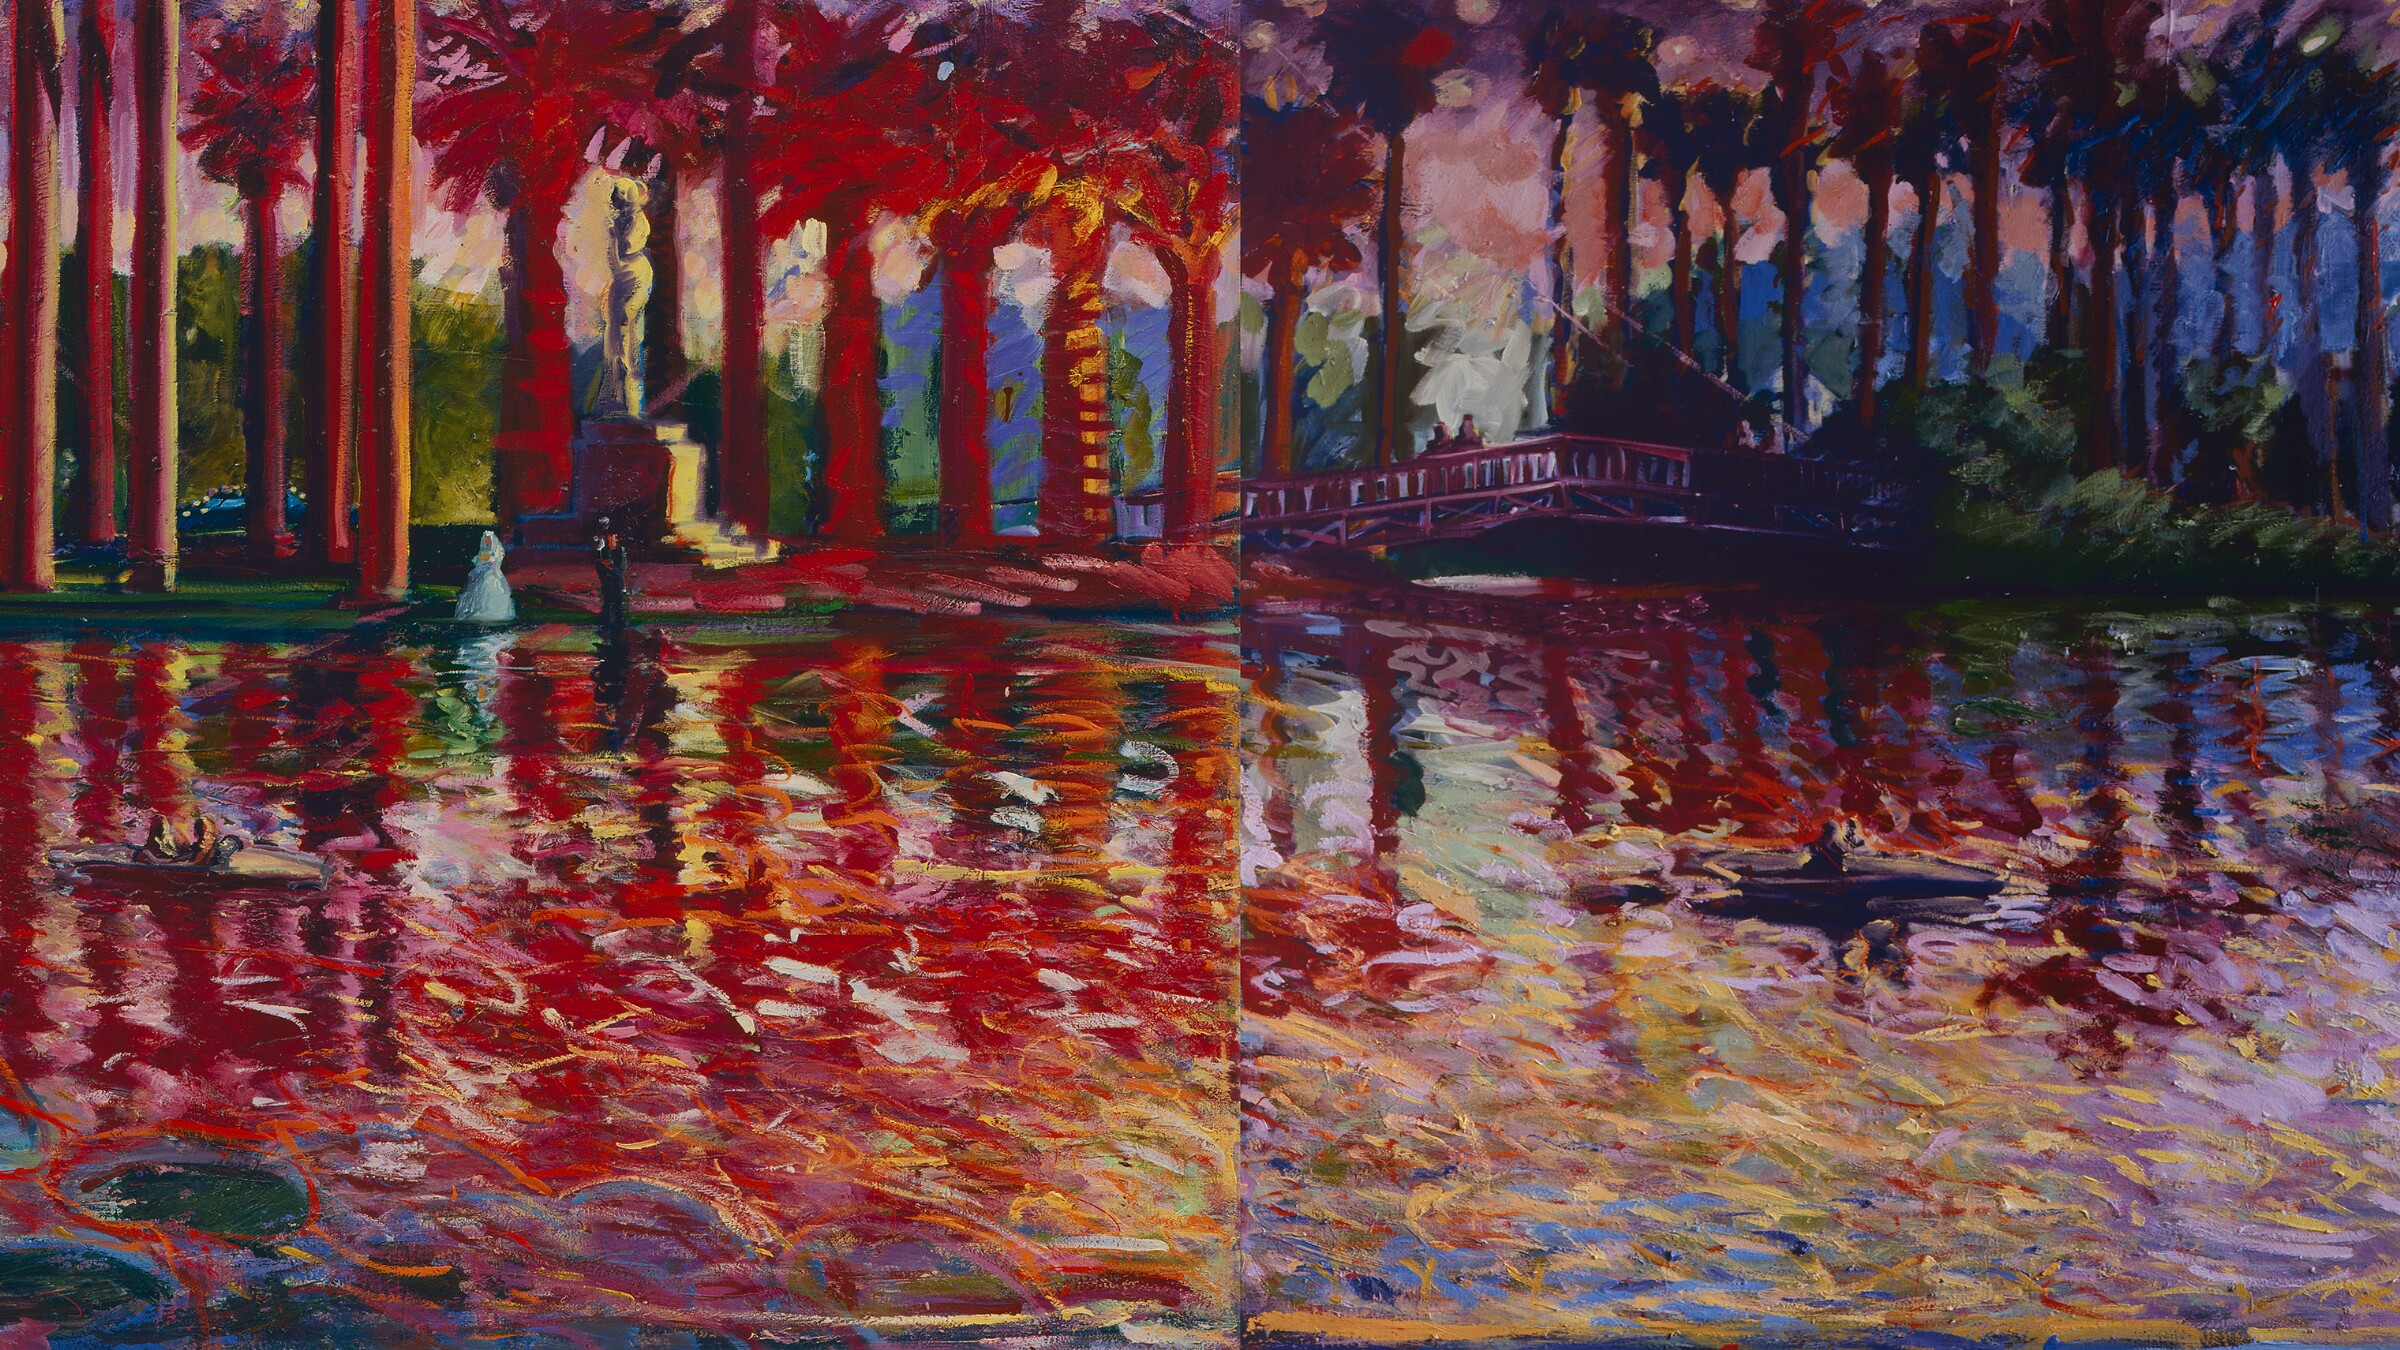 A blue, purple, green, and red impressionist-style painting of Echo Park Lake